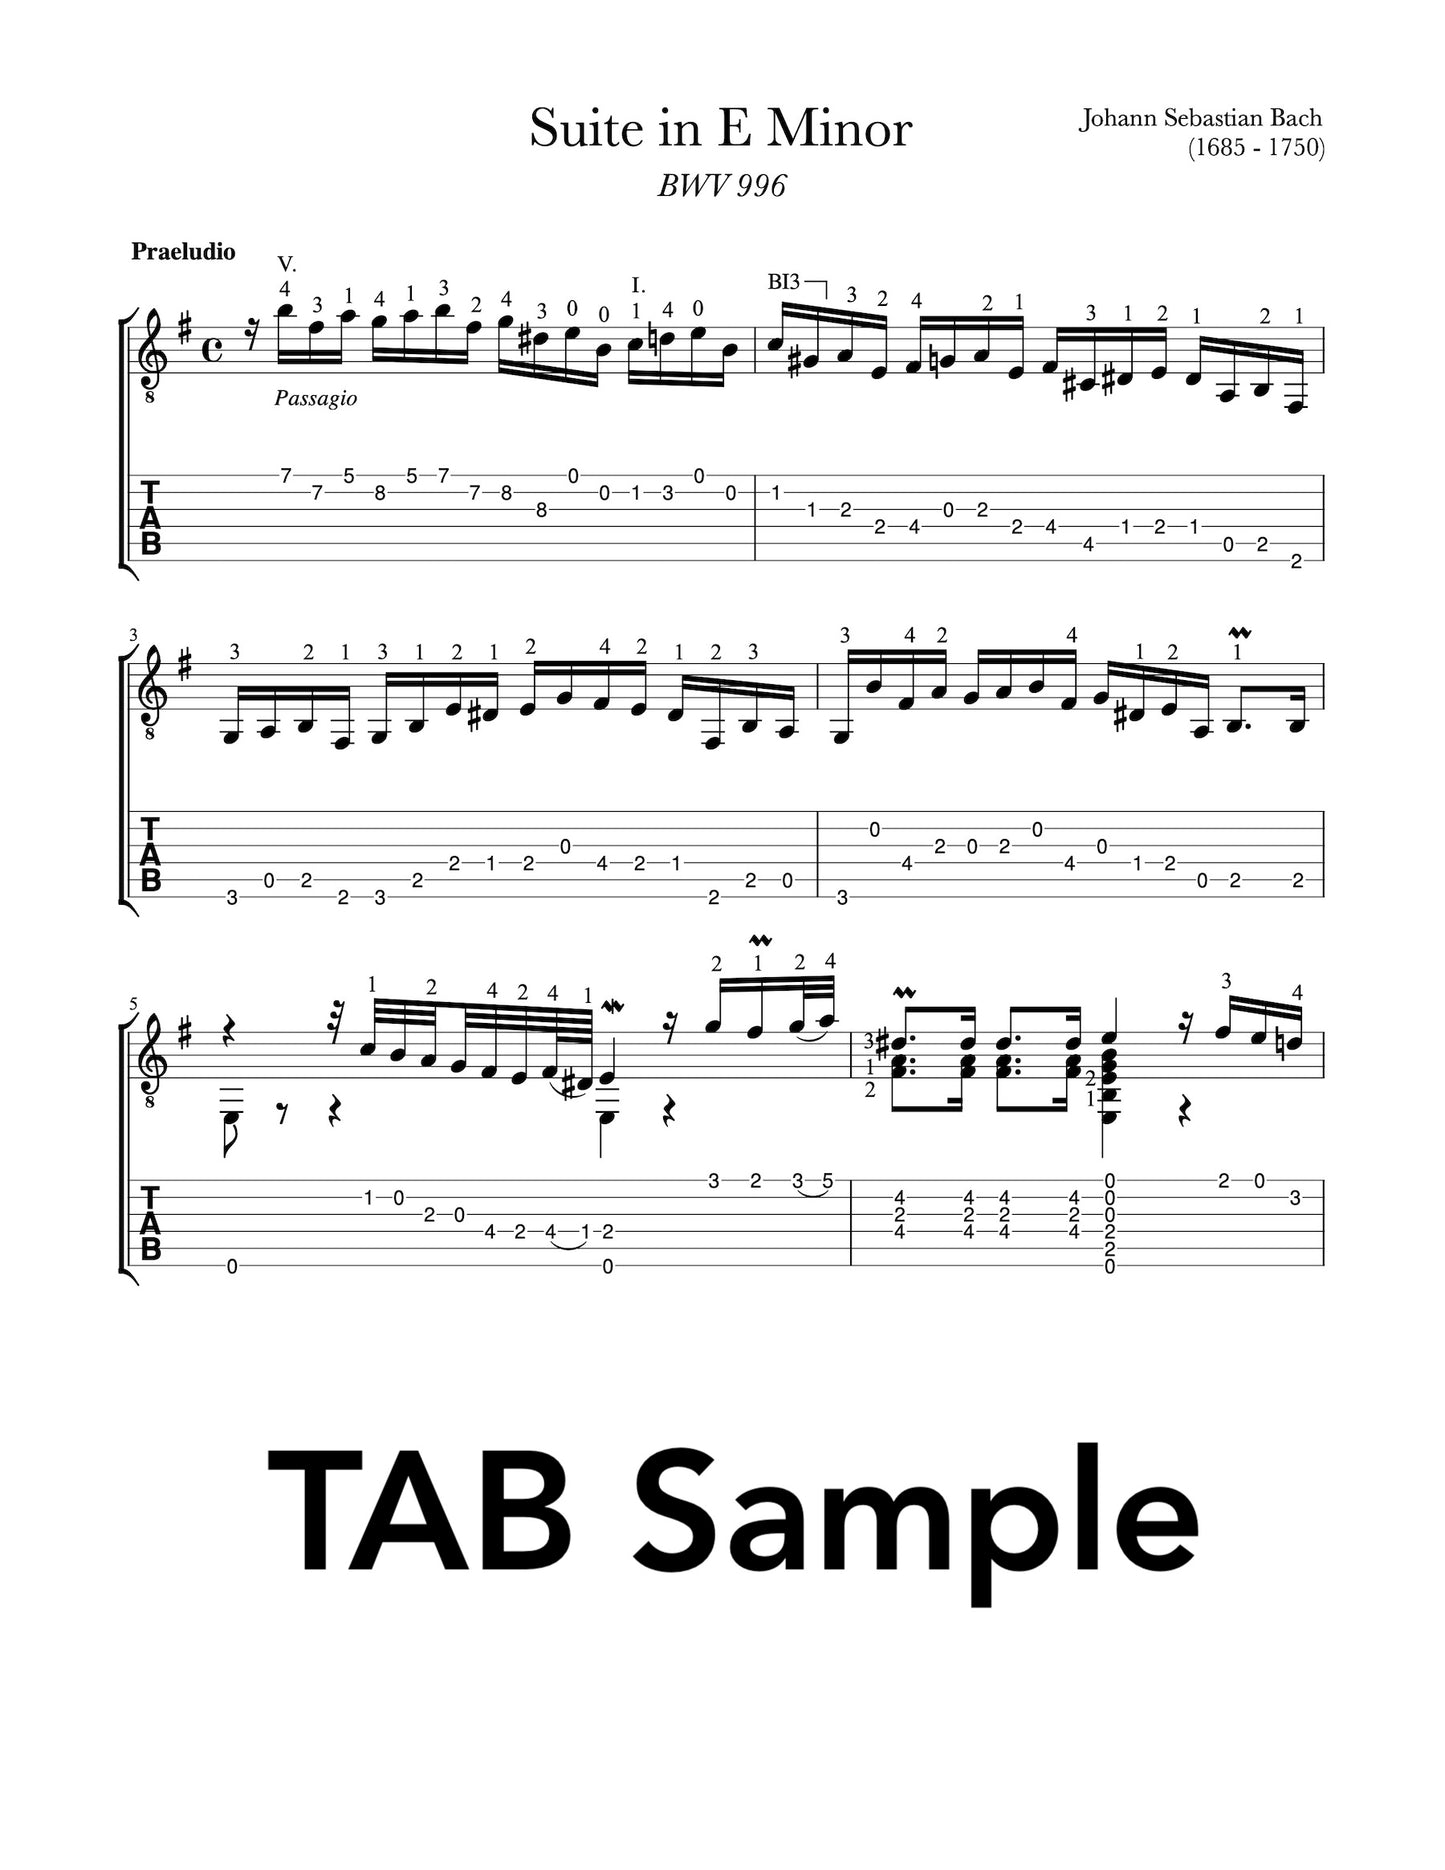 Lute Suite in E Minor BWV 996 by Bach for Classical Guitar (Tab Sample)